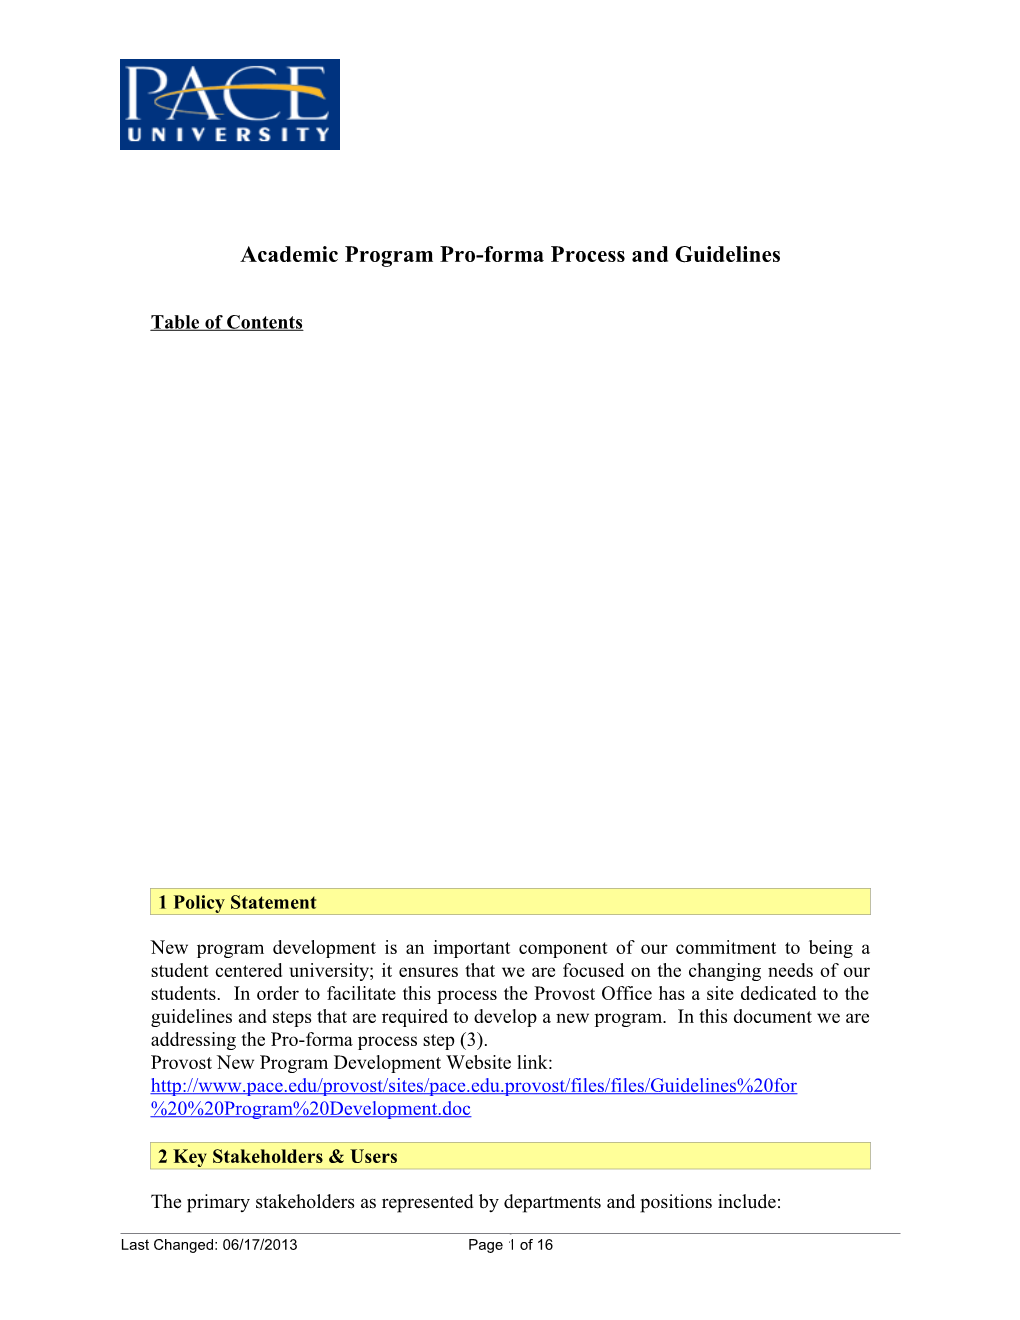 Academic Program Pro-Forma Process and Guidelines